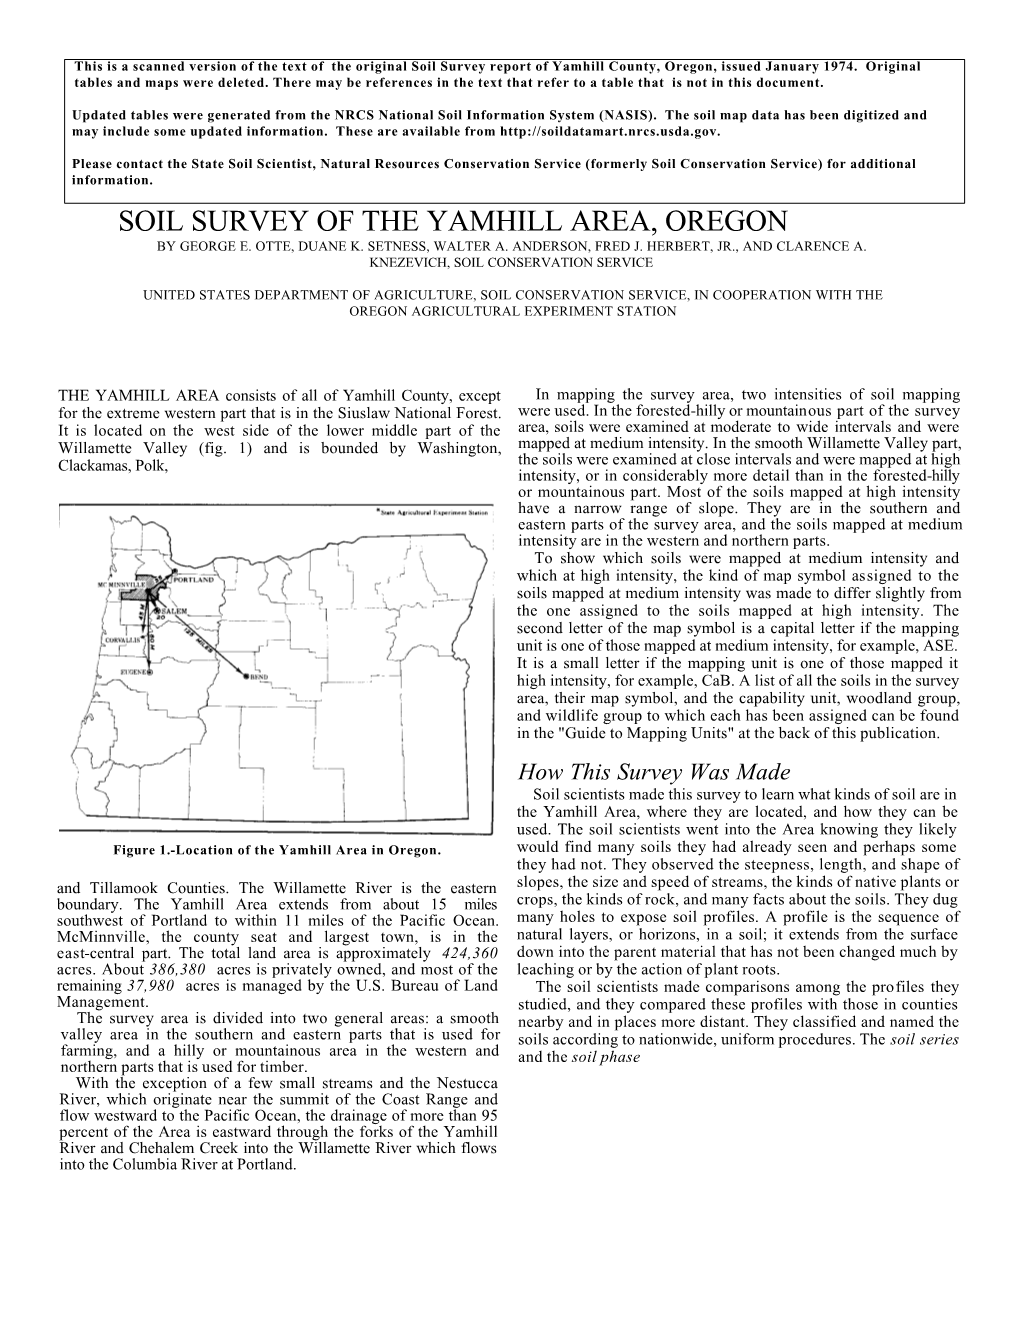 Soil Survey of the Yamhill Area, Oregon by George E